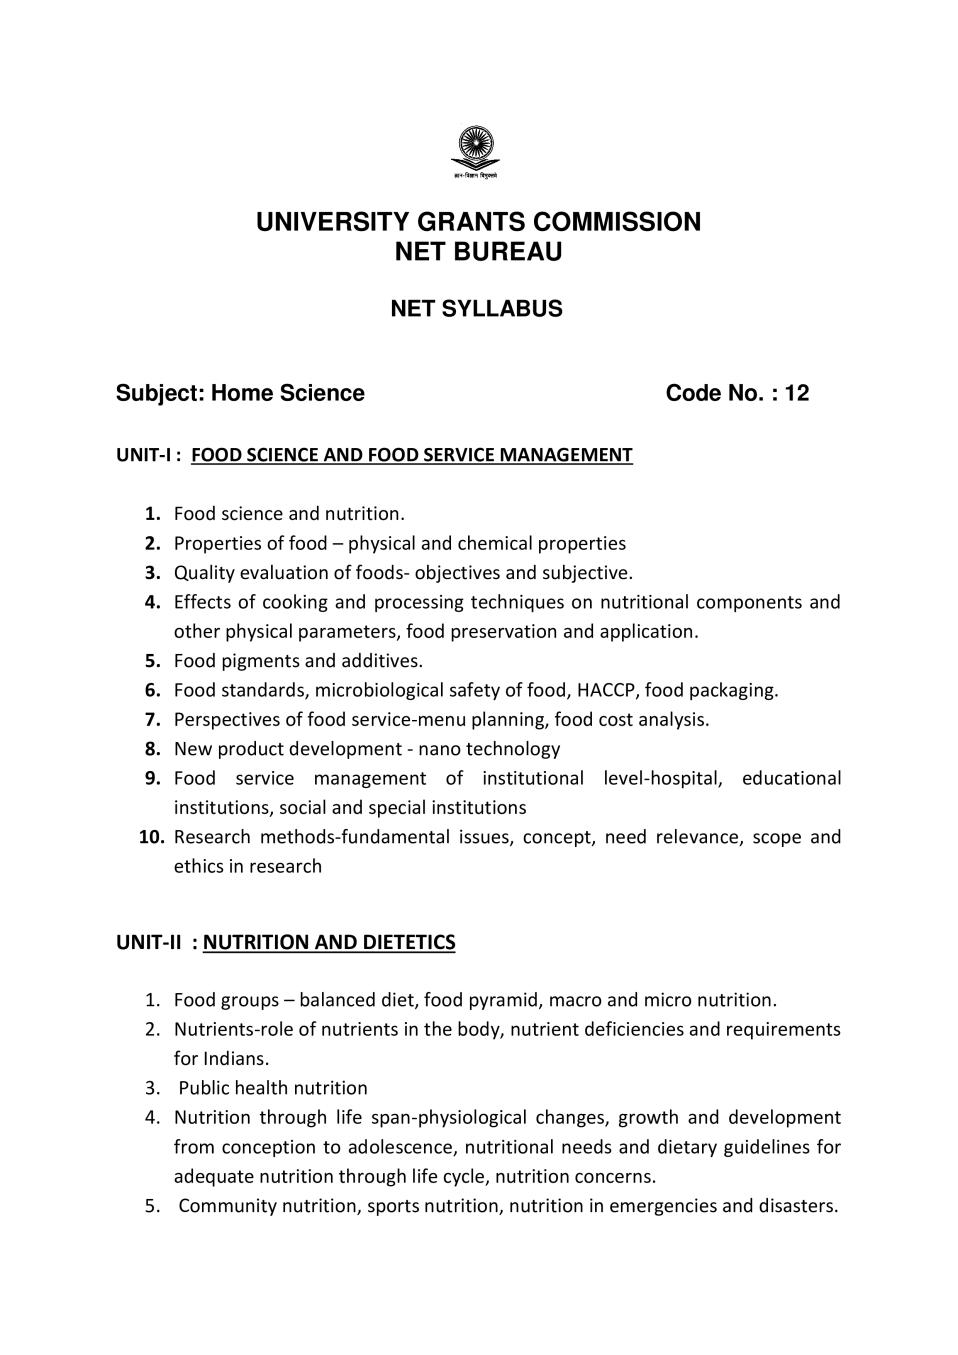 UGC NET Syllabus for Home Science 2020 - Page 1